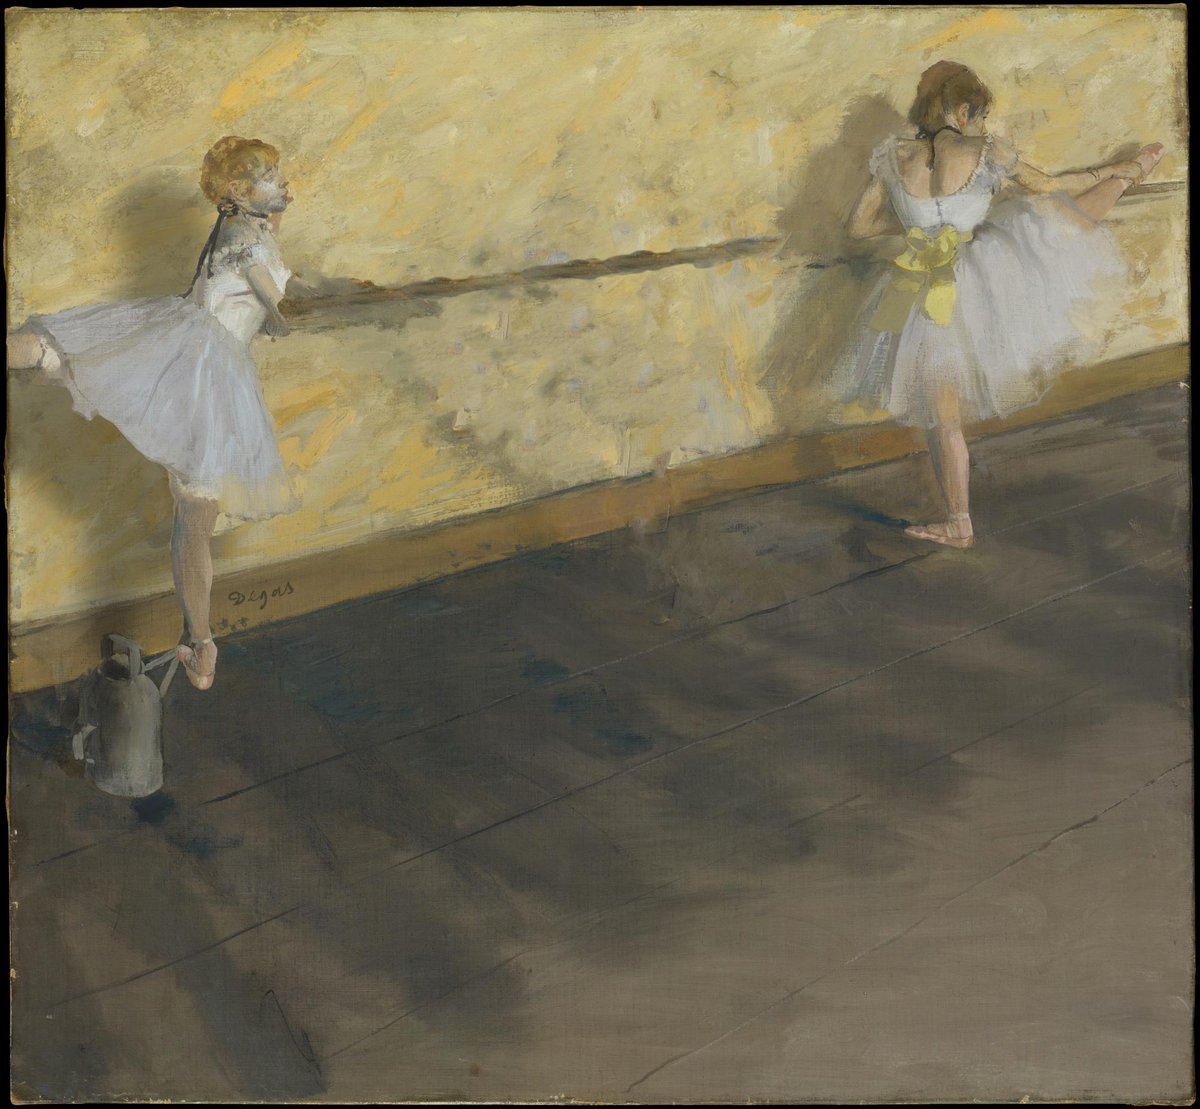 You can see this social distancing beginning to catch on. Even though we're not all doing it, Degas made a mark with his piece "Dancers Practicing Social Distancing At The Barre".